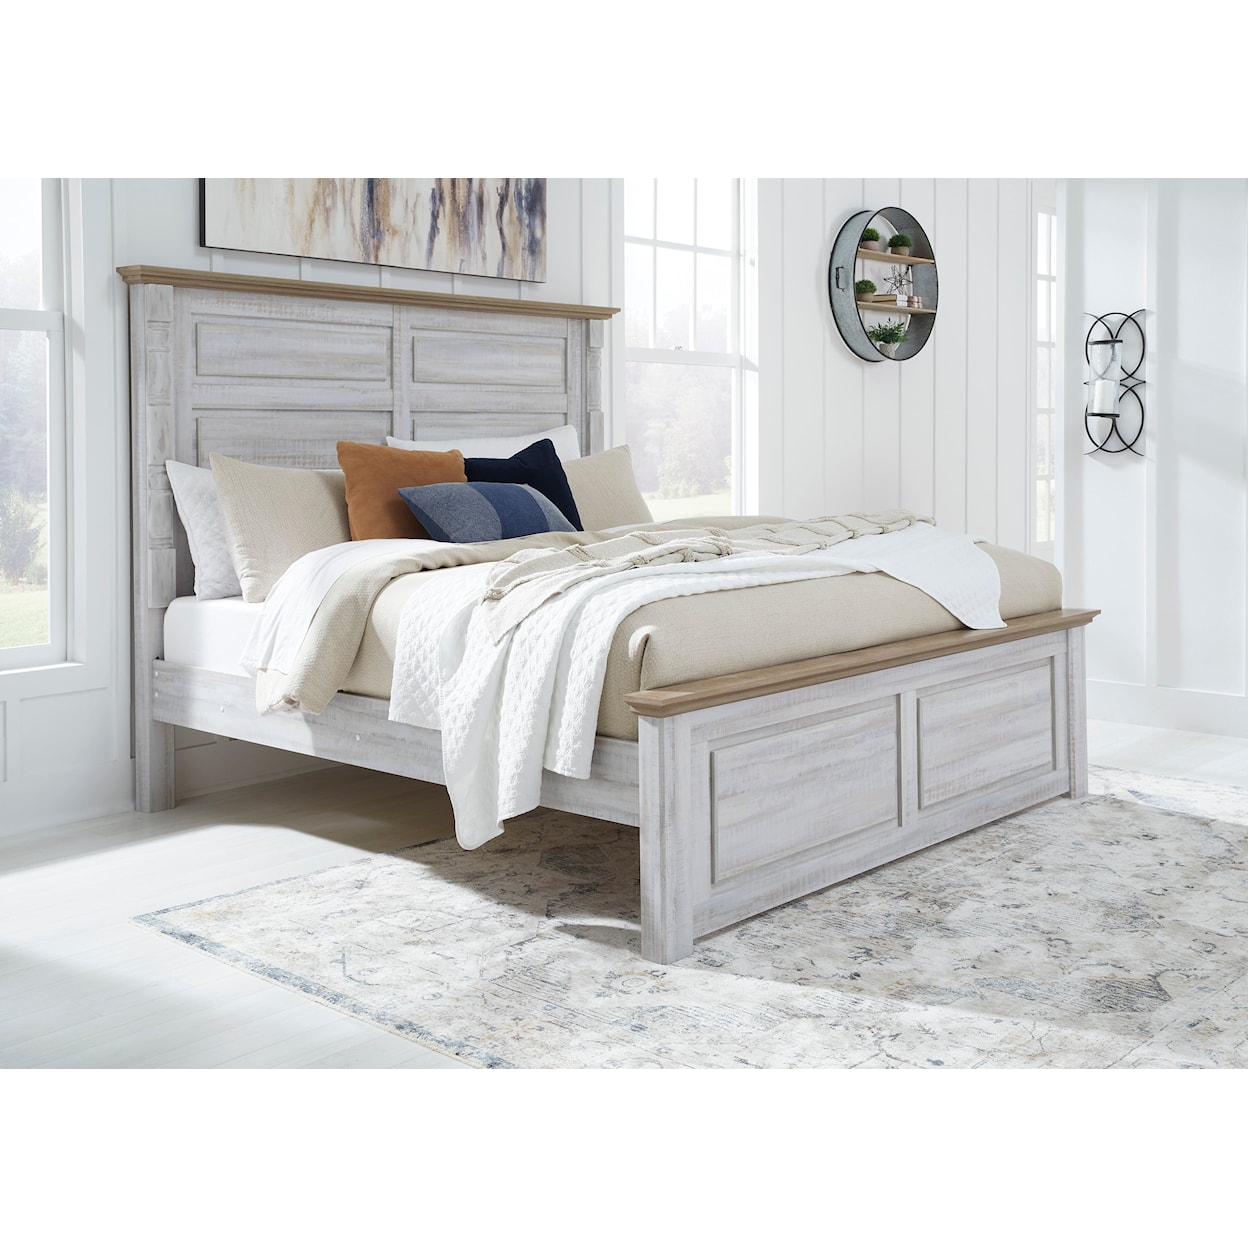 Benchcraft Haven Bay King Panel Bed